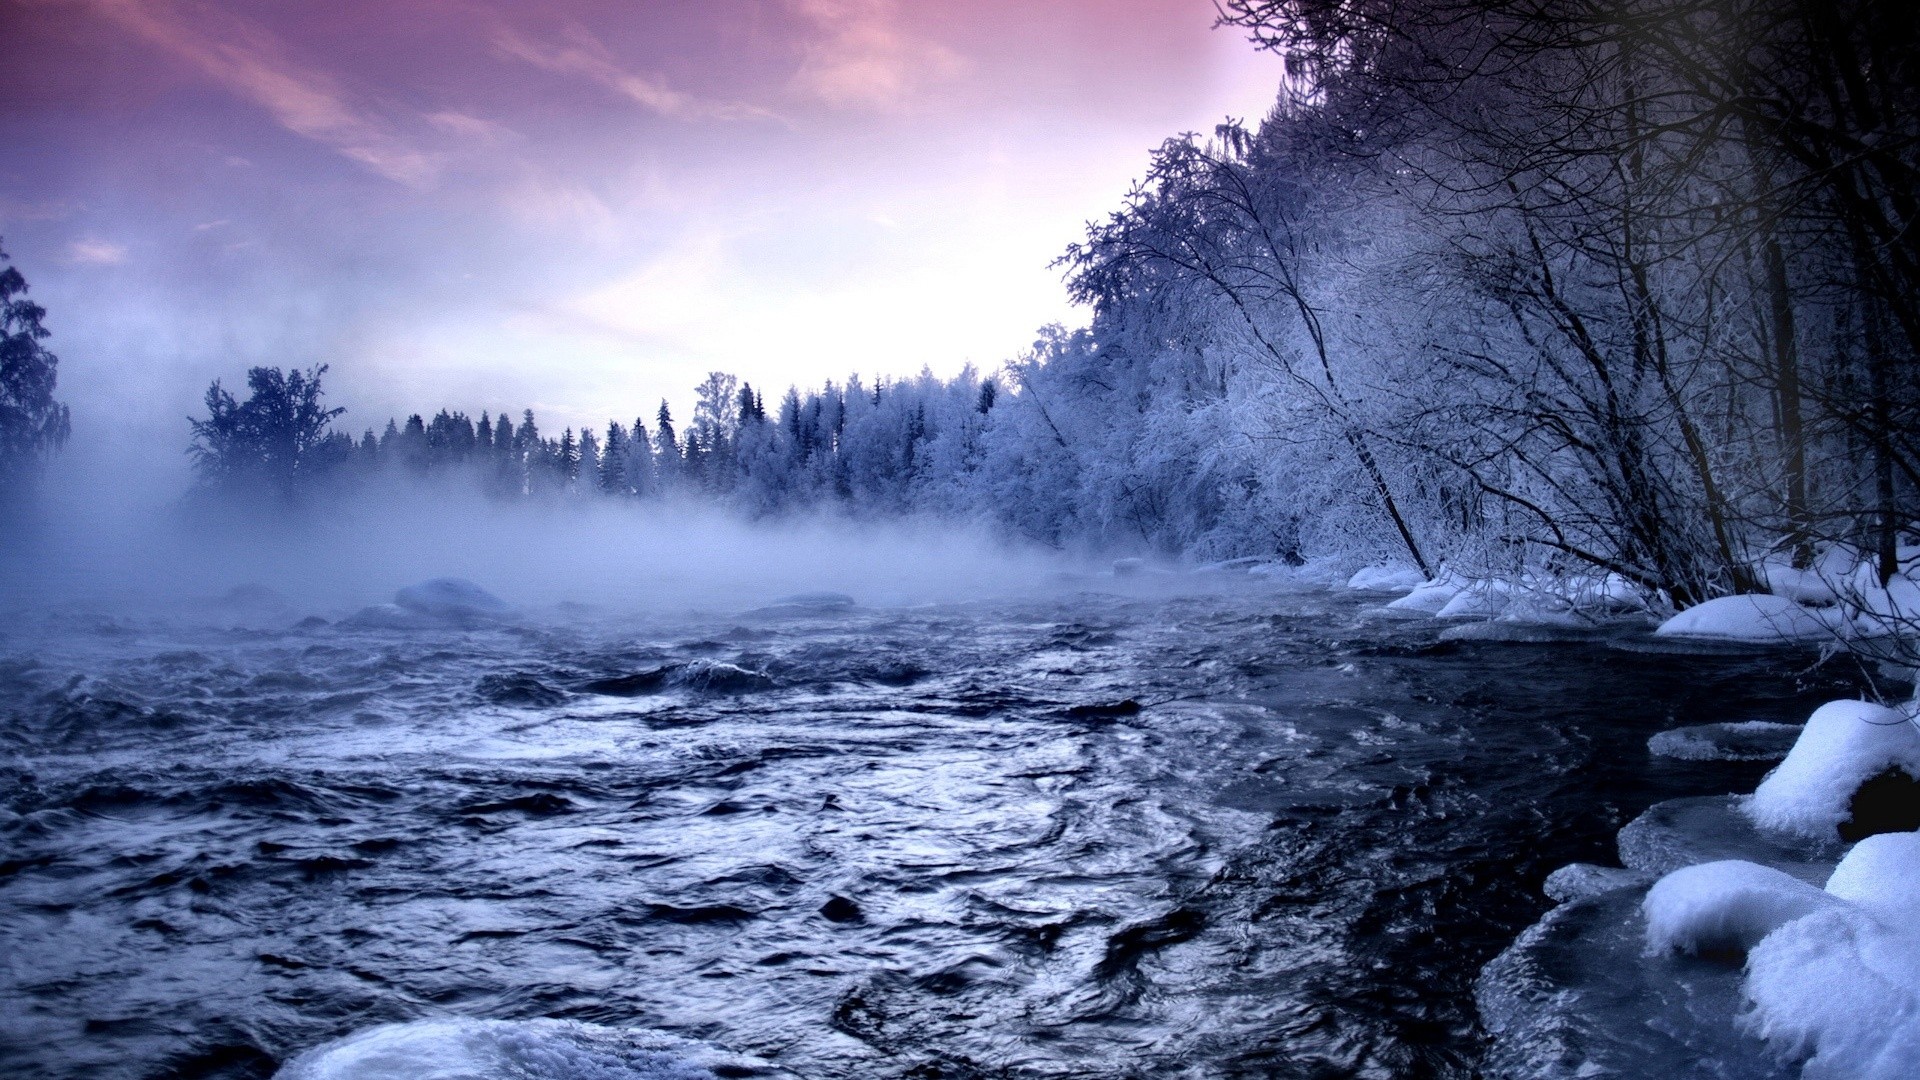 General 1920x1080 landscape mist forest snow river nature winter water trees